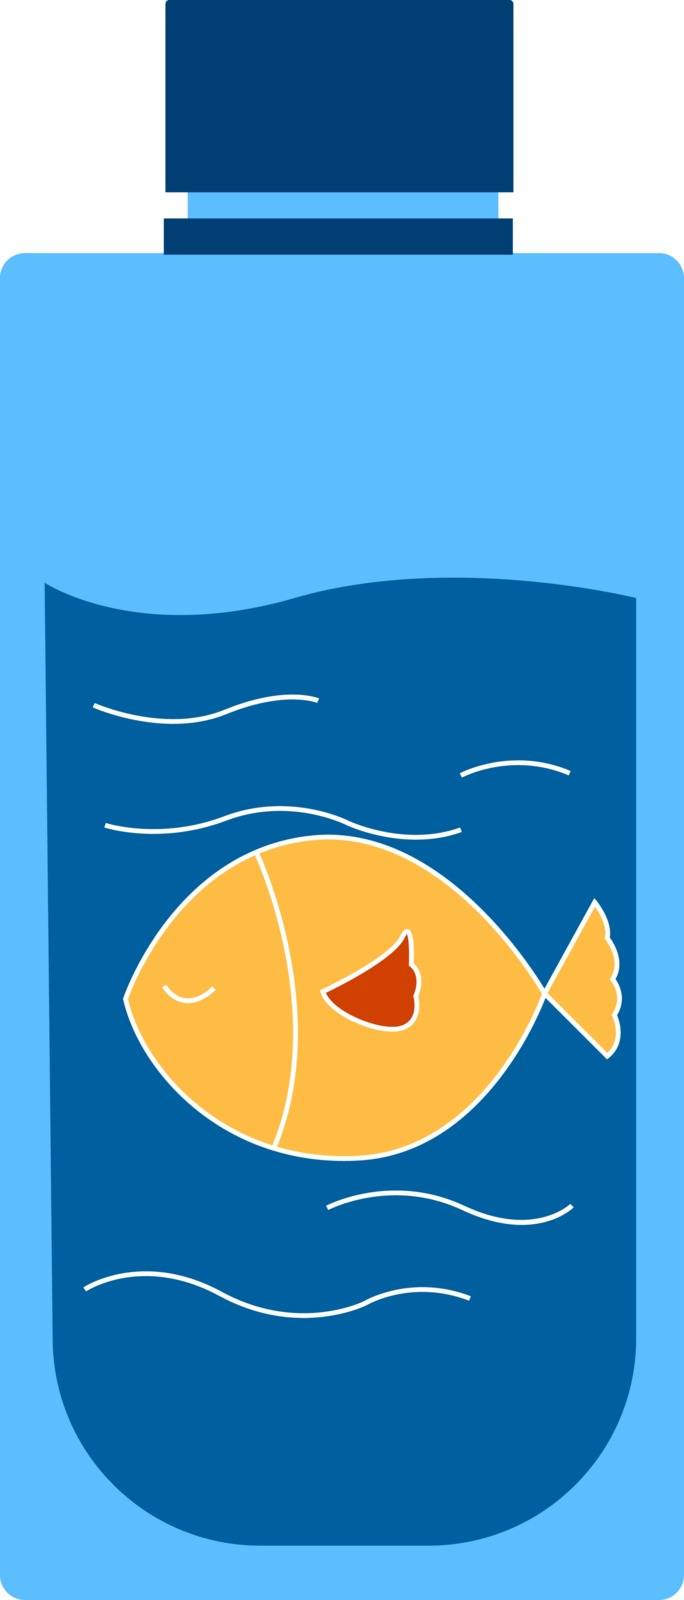 Yellow fish in bottle, illustration, vector on white background.